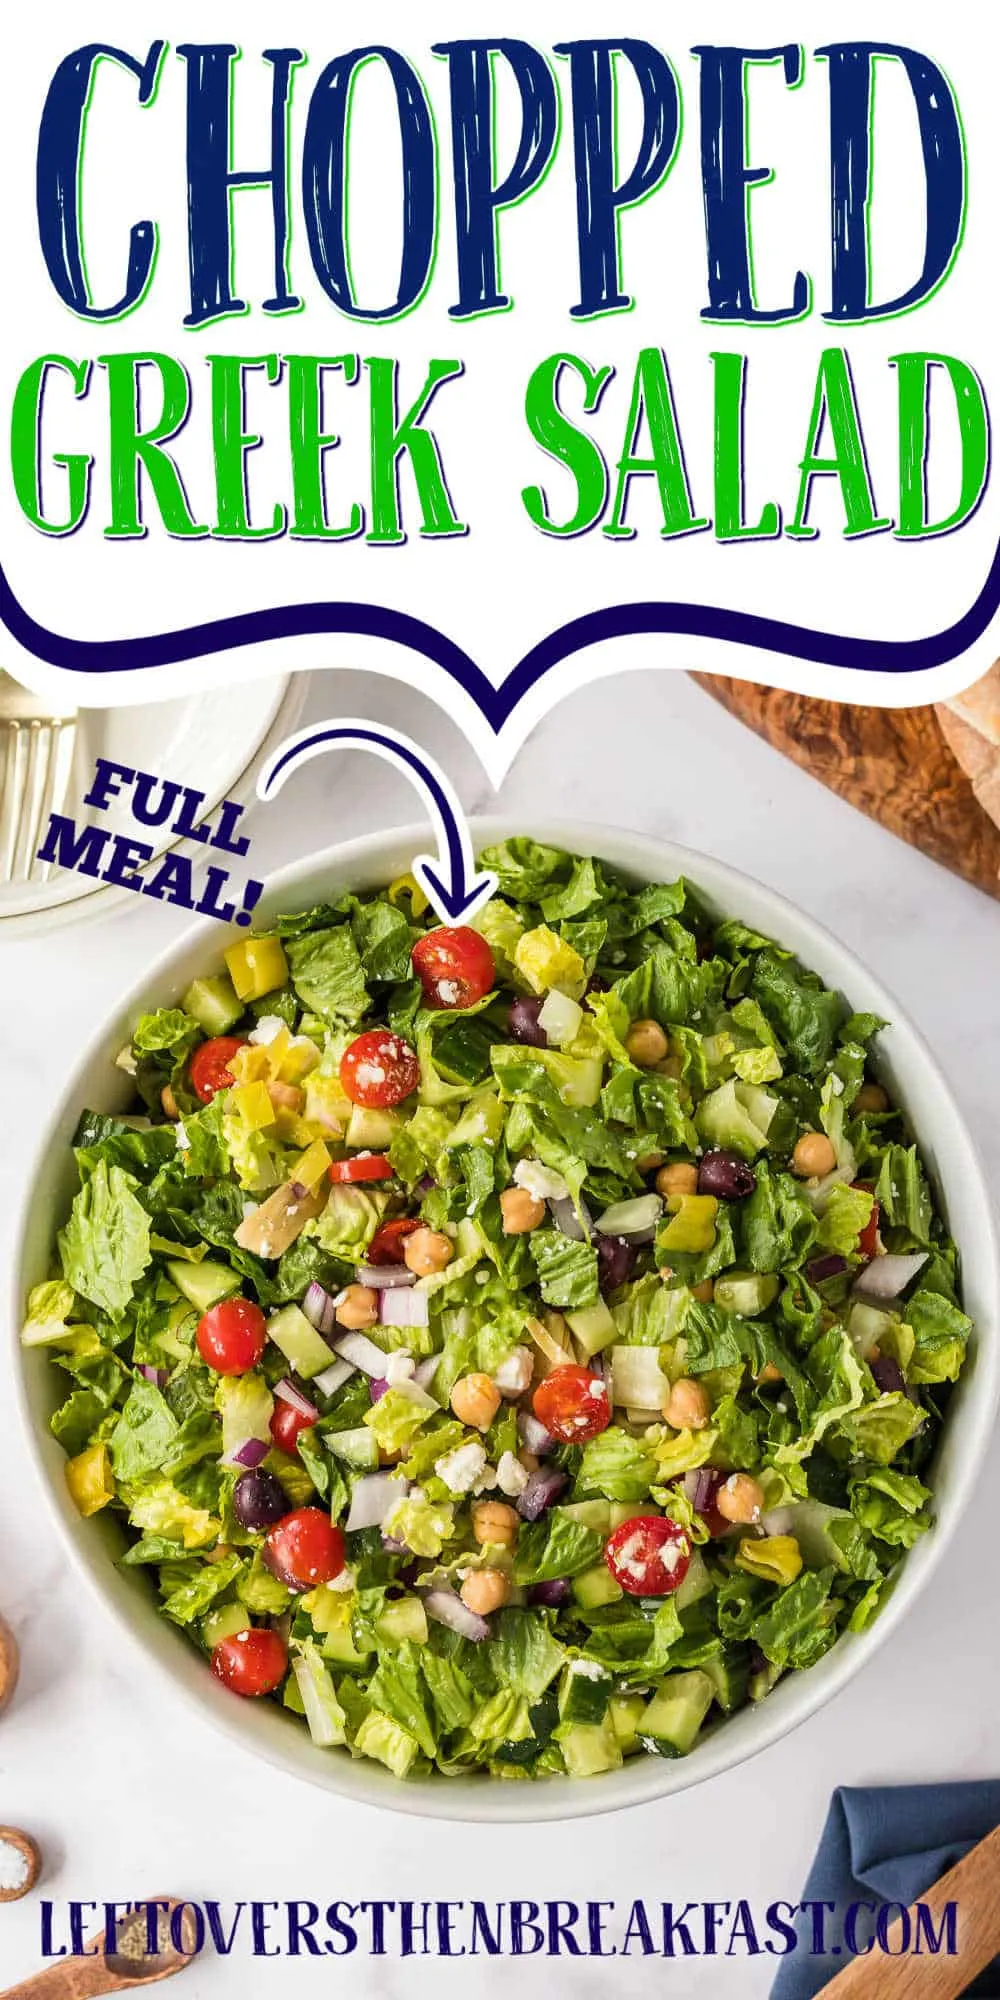 bowl of salad with text "chopped greek salad"